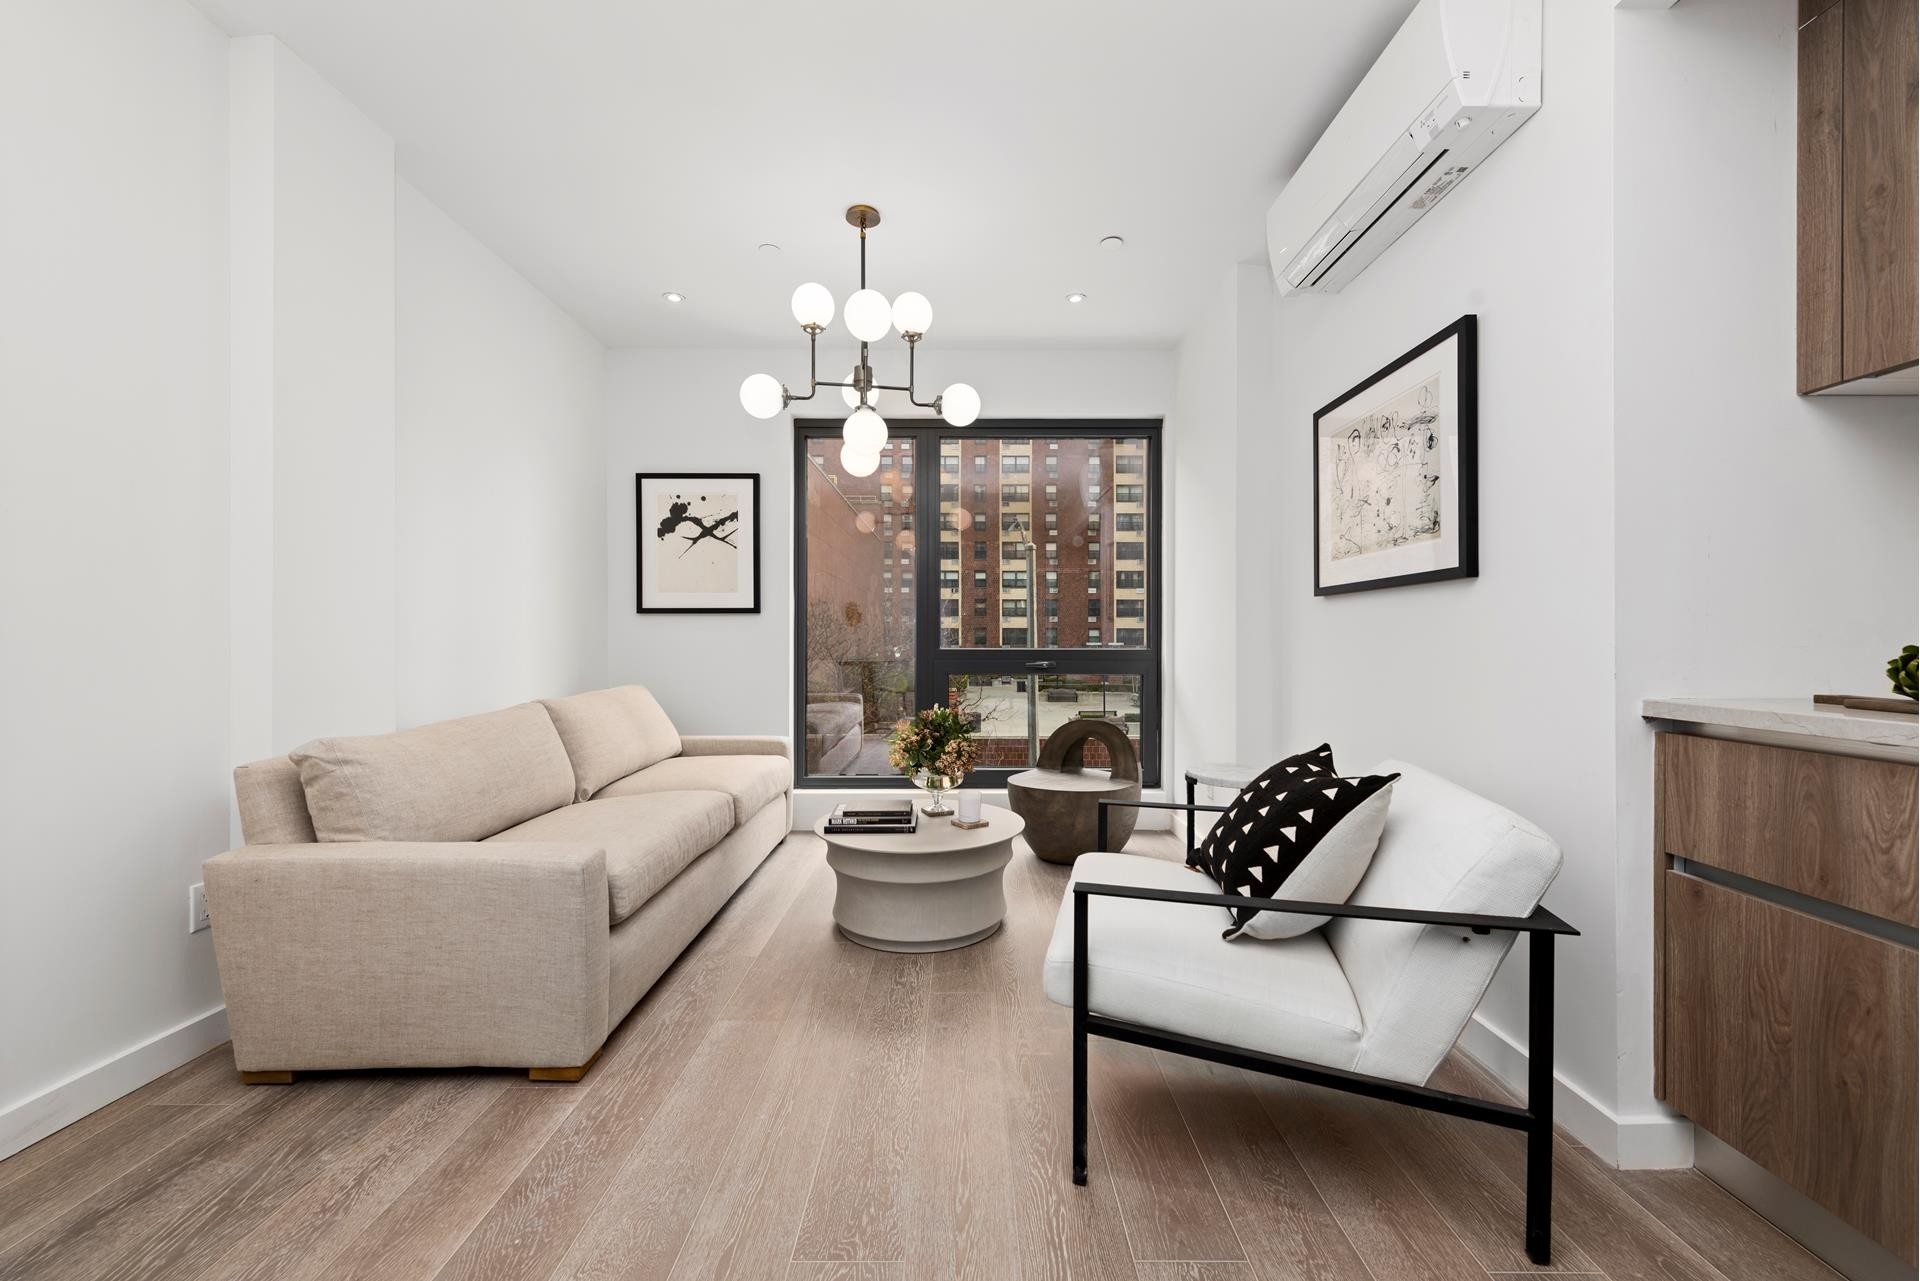 Condominium for Sale at Alston, 308 W 133RD ST, 2B Central Harlem, New York, NY 10030